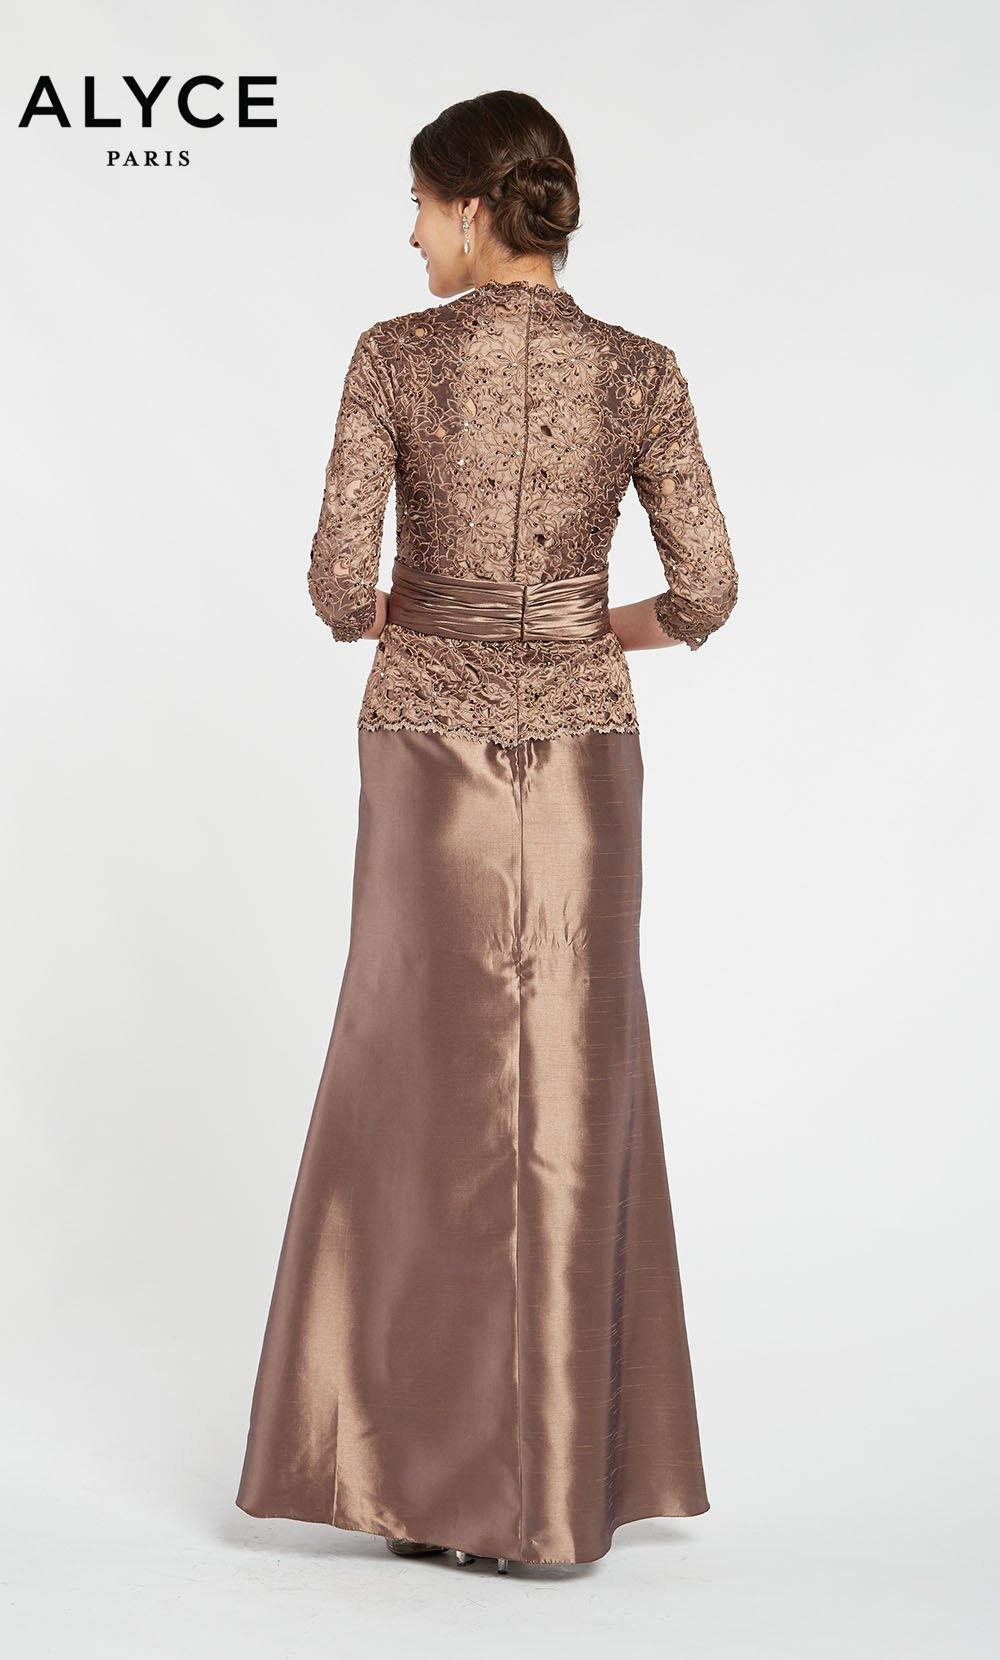 Nutmeg elegant mother of the bride dress with a V-neckline and a lace peplum top with sleeves